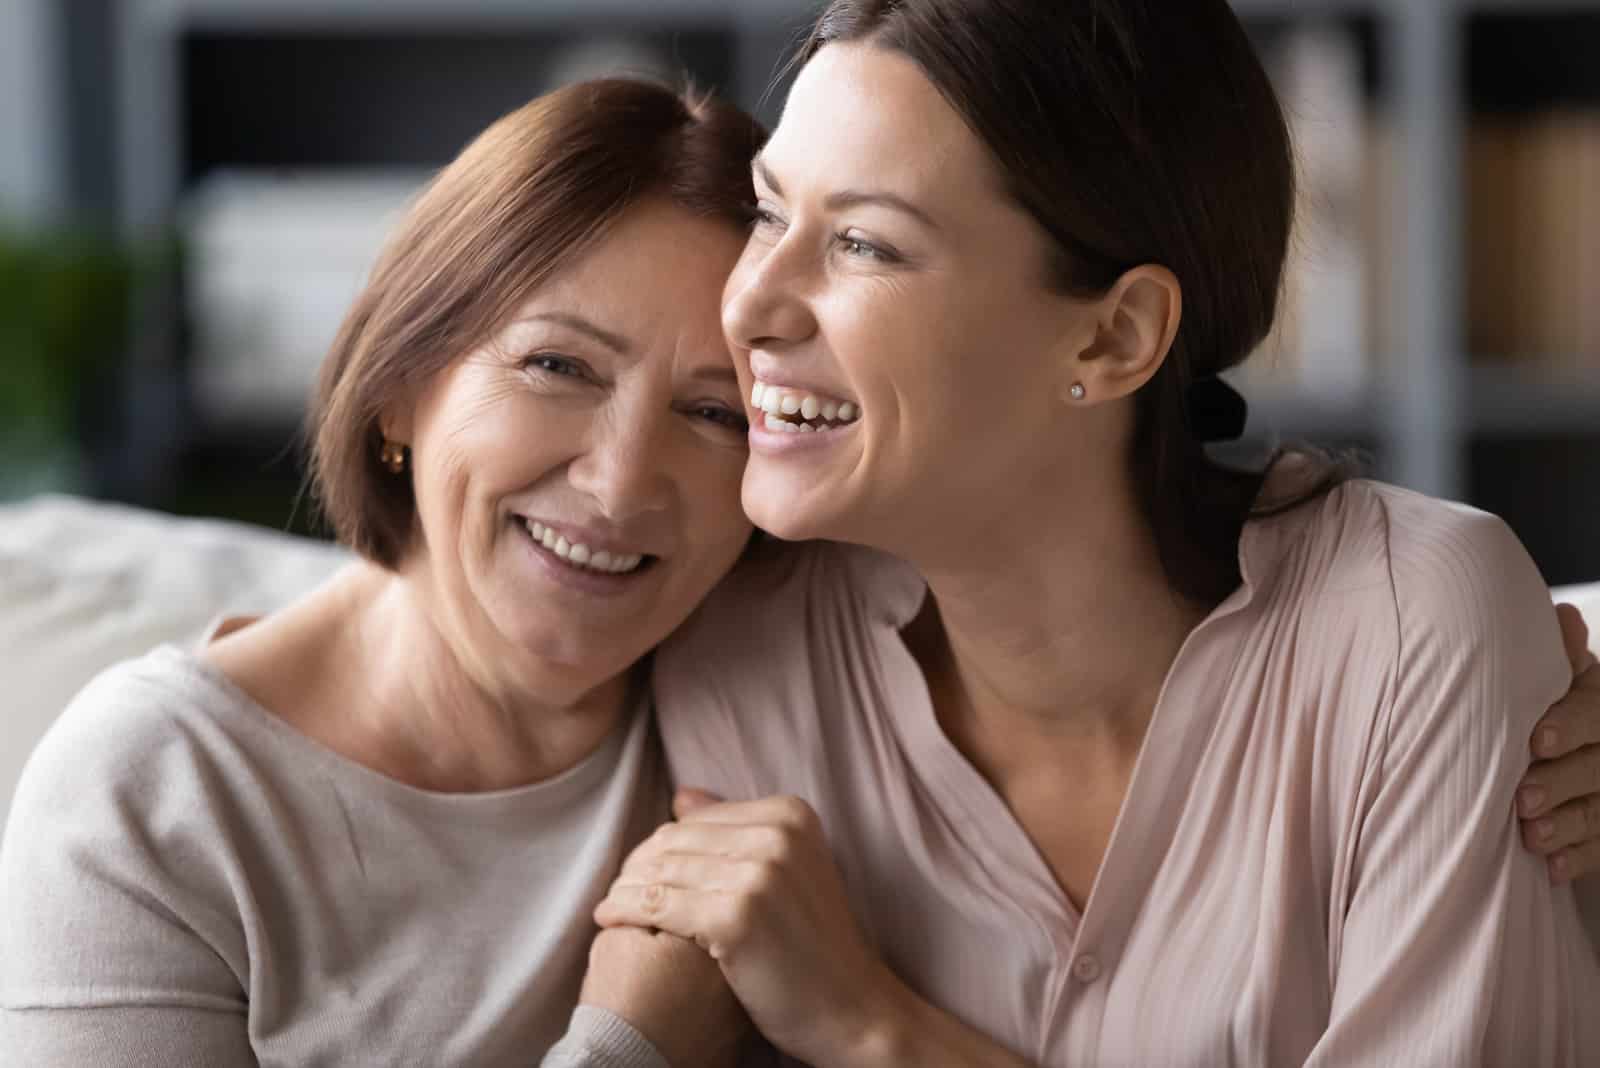 mother and daughter laughing